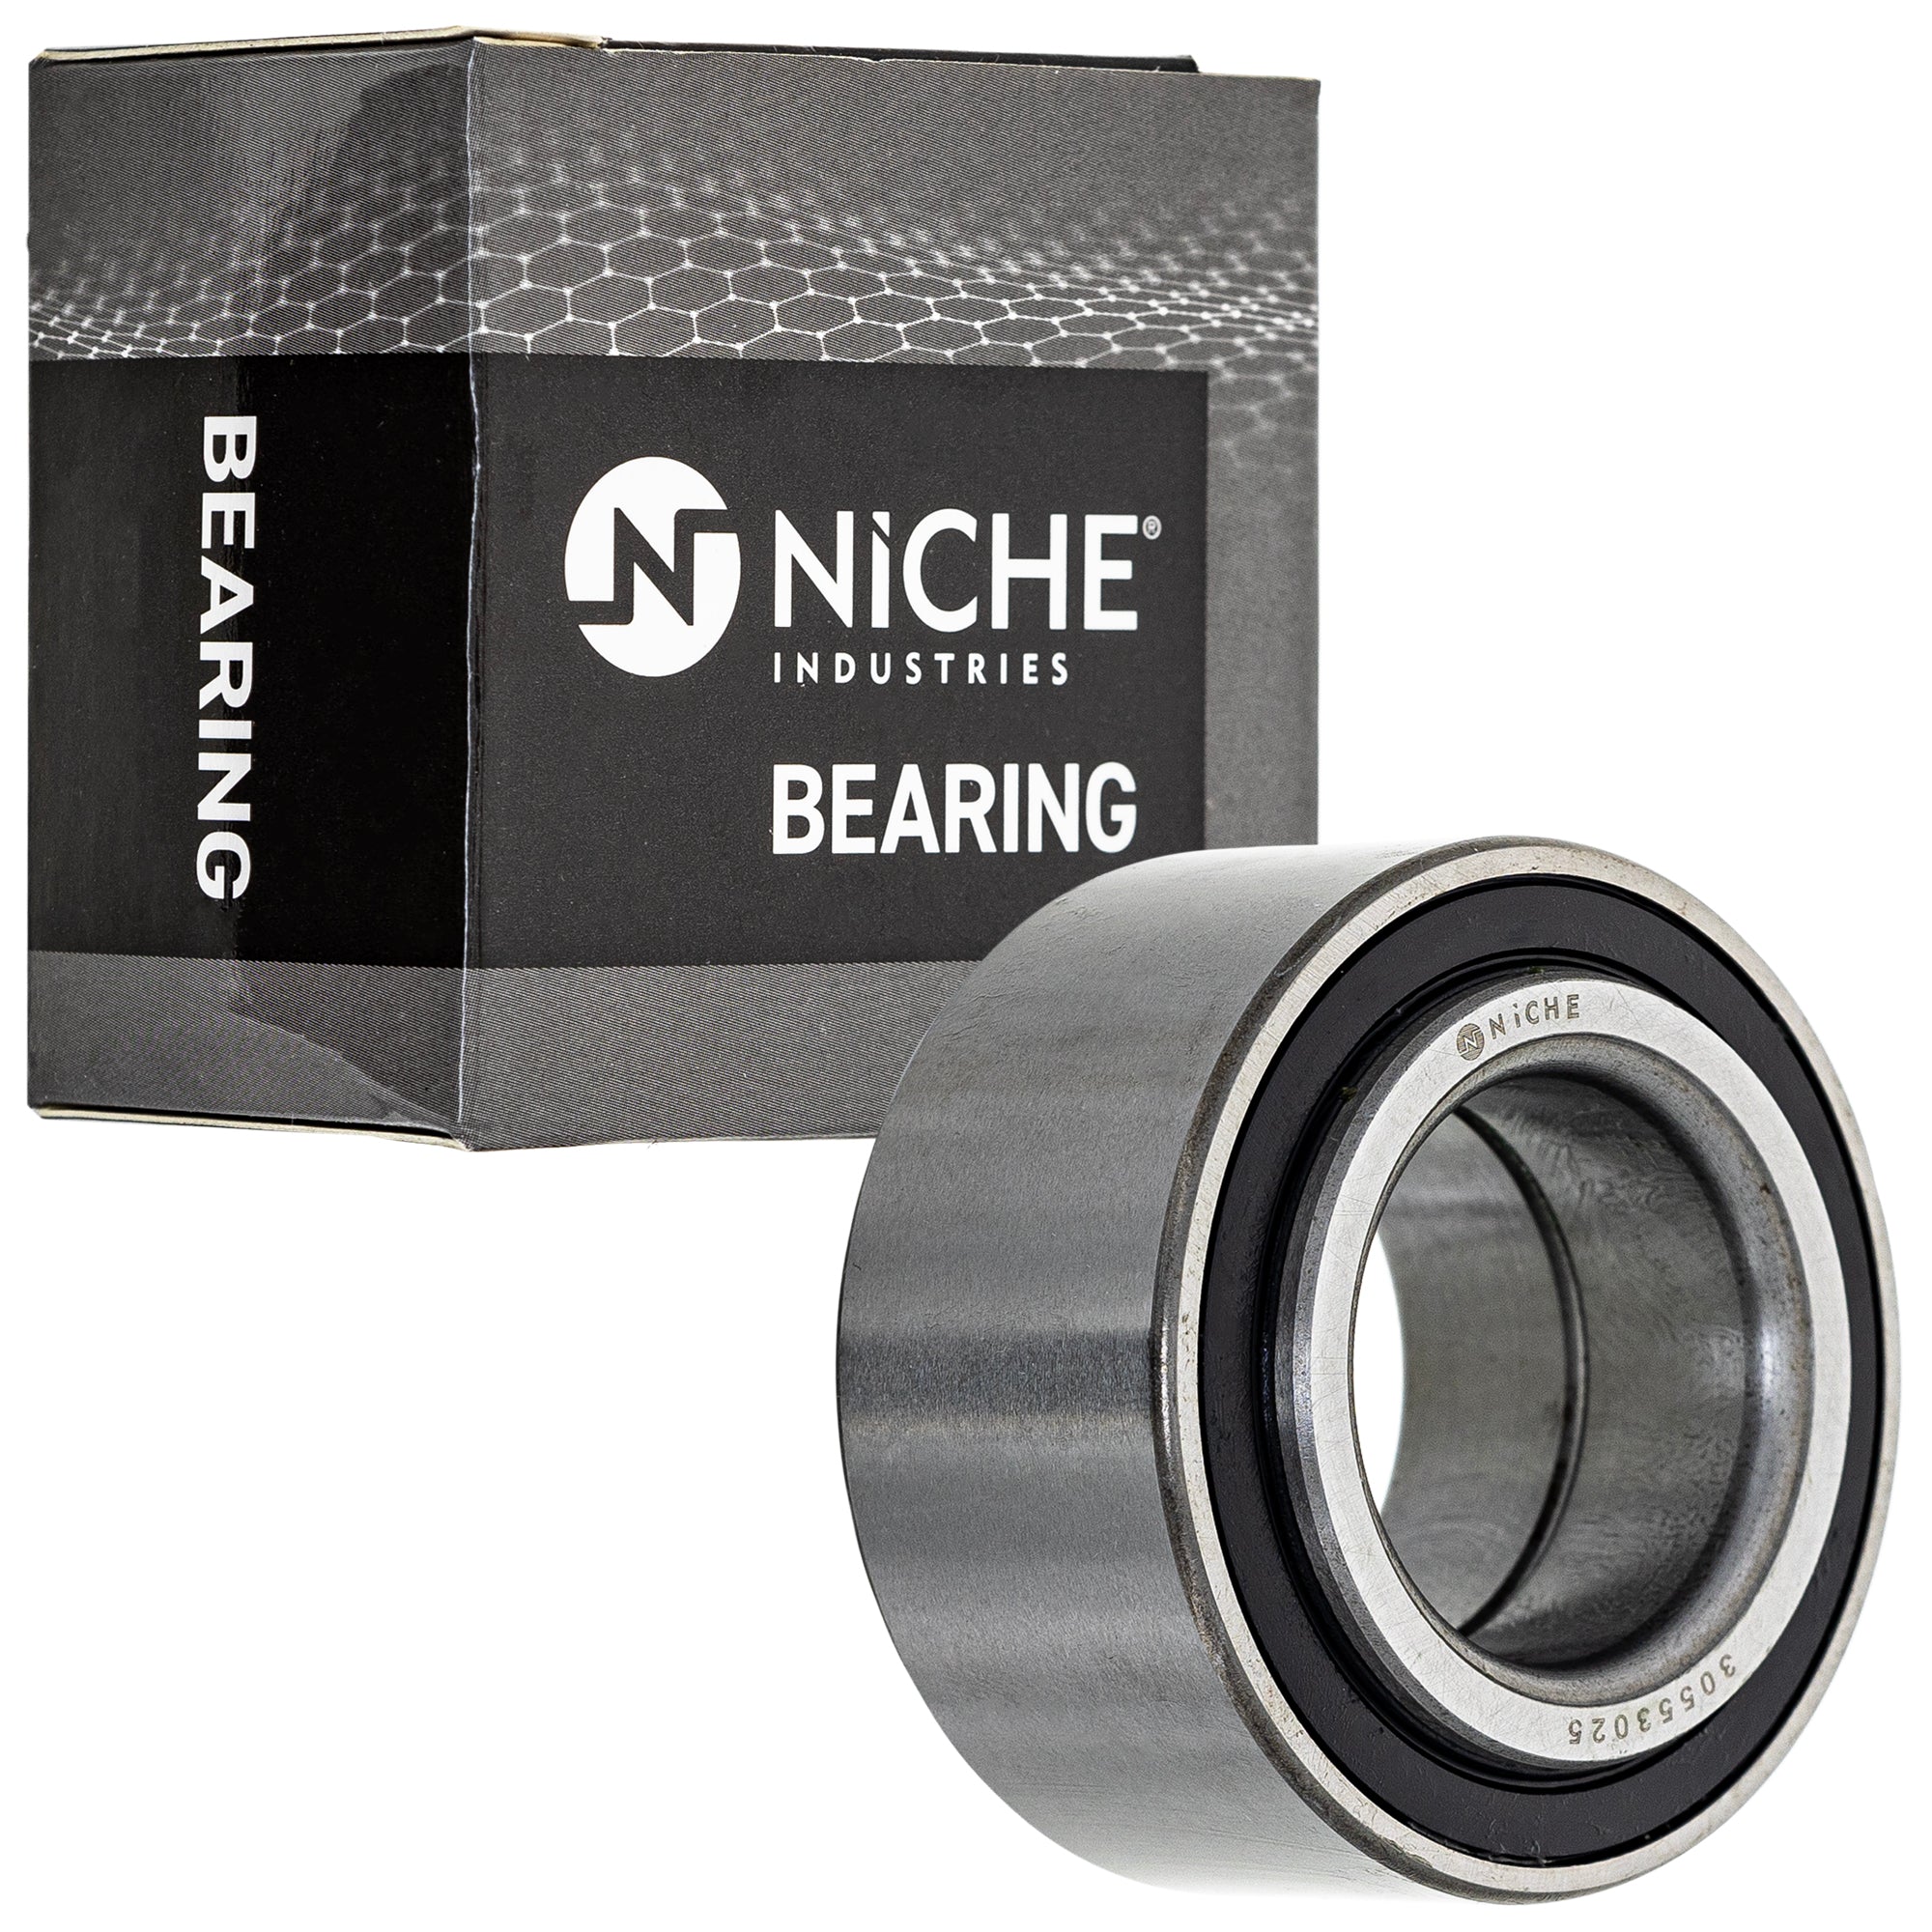 NICHE 519-CBB2263R Ball Bearing Pack of 2 2-Pack for zOTHER Renegade